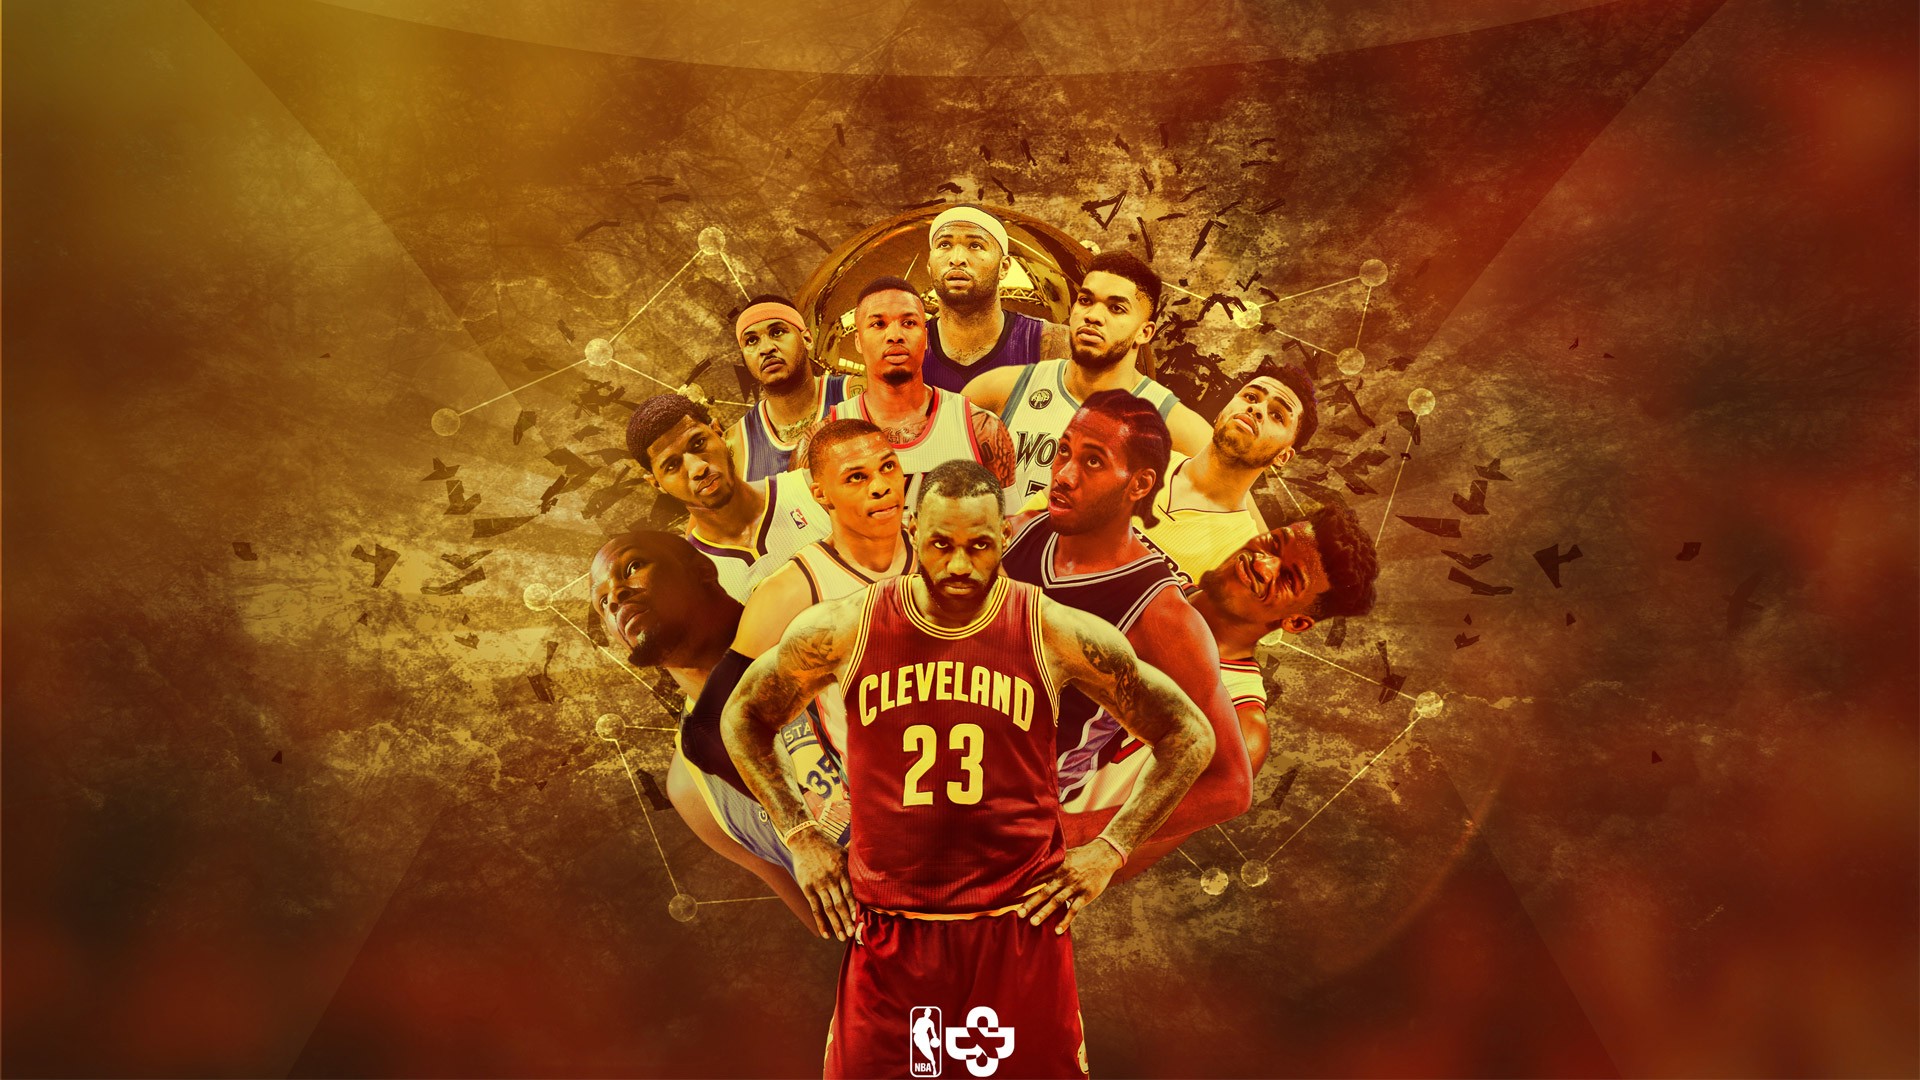 50+ Nba wallpapers ·① Download free HD backgrounds for ...